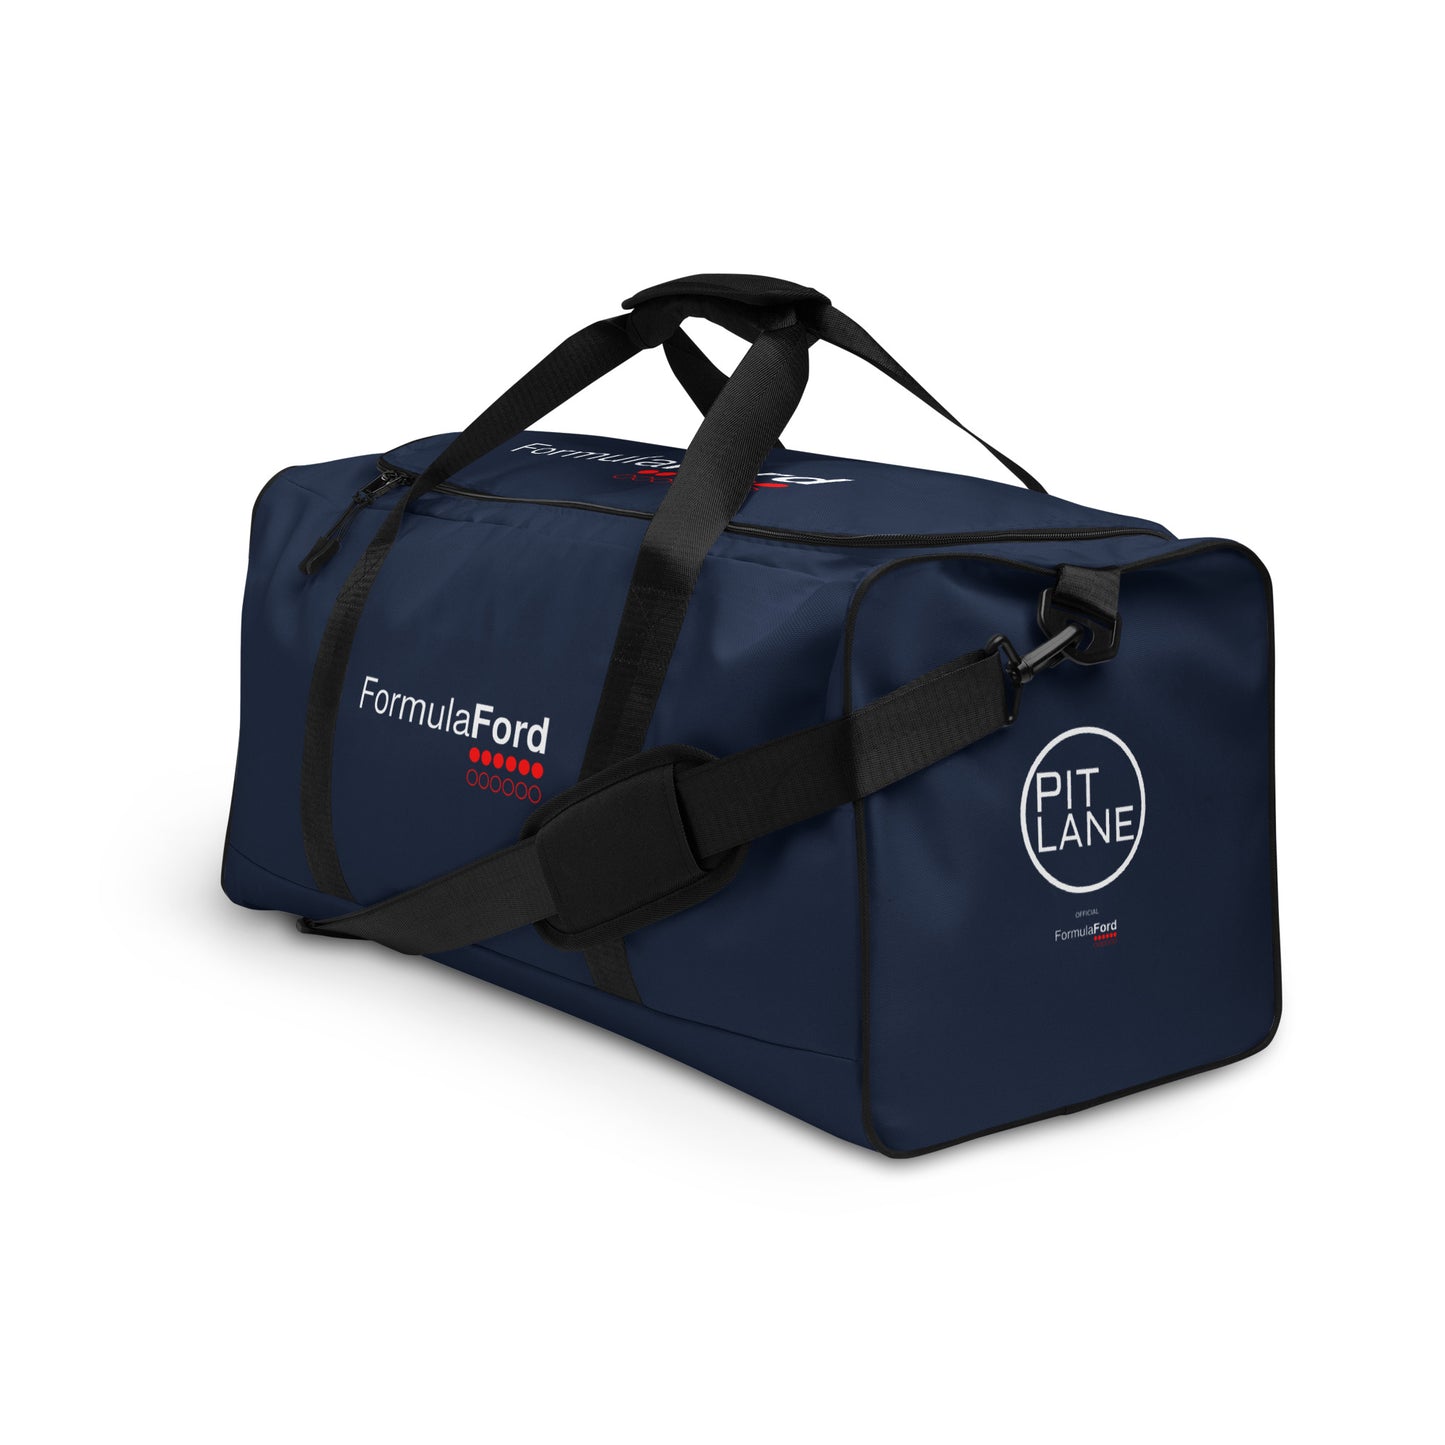 FORMULA FORD Official Waterproof Duffle bag - Large - Navy